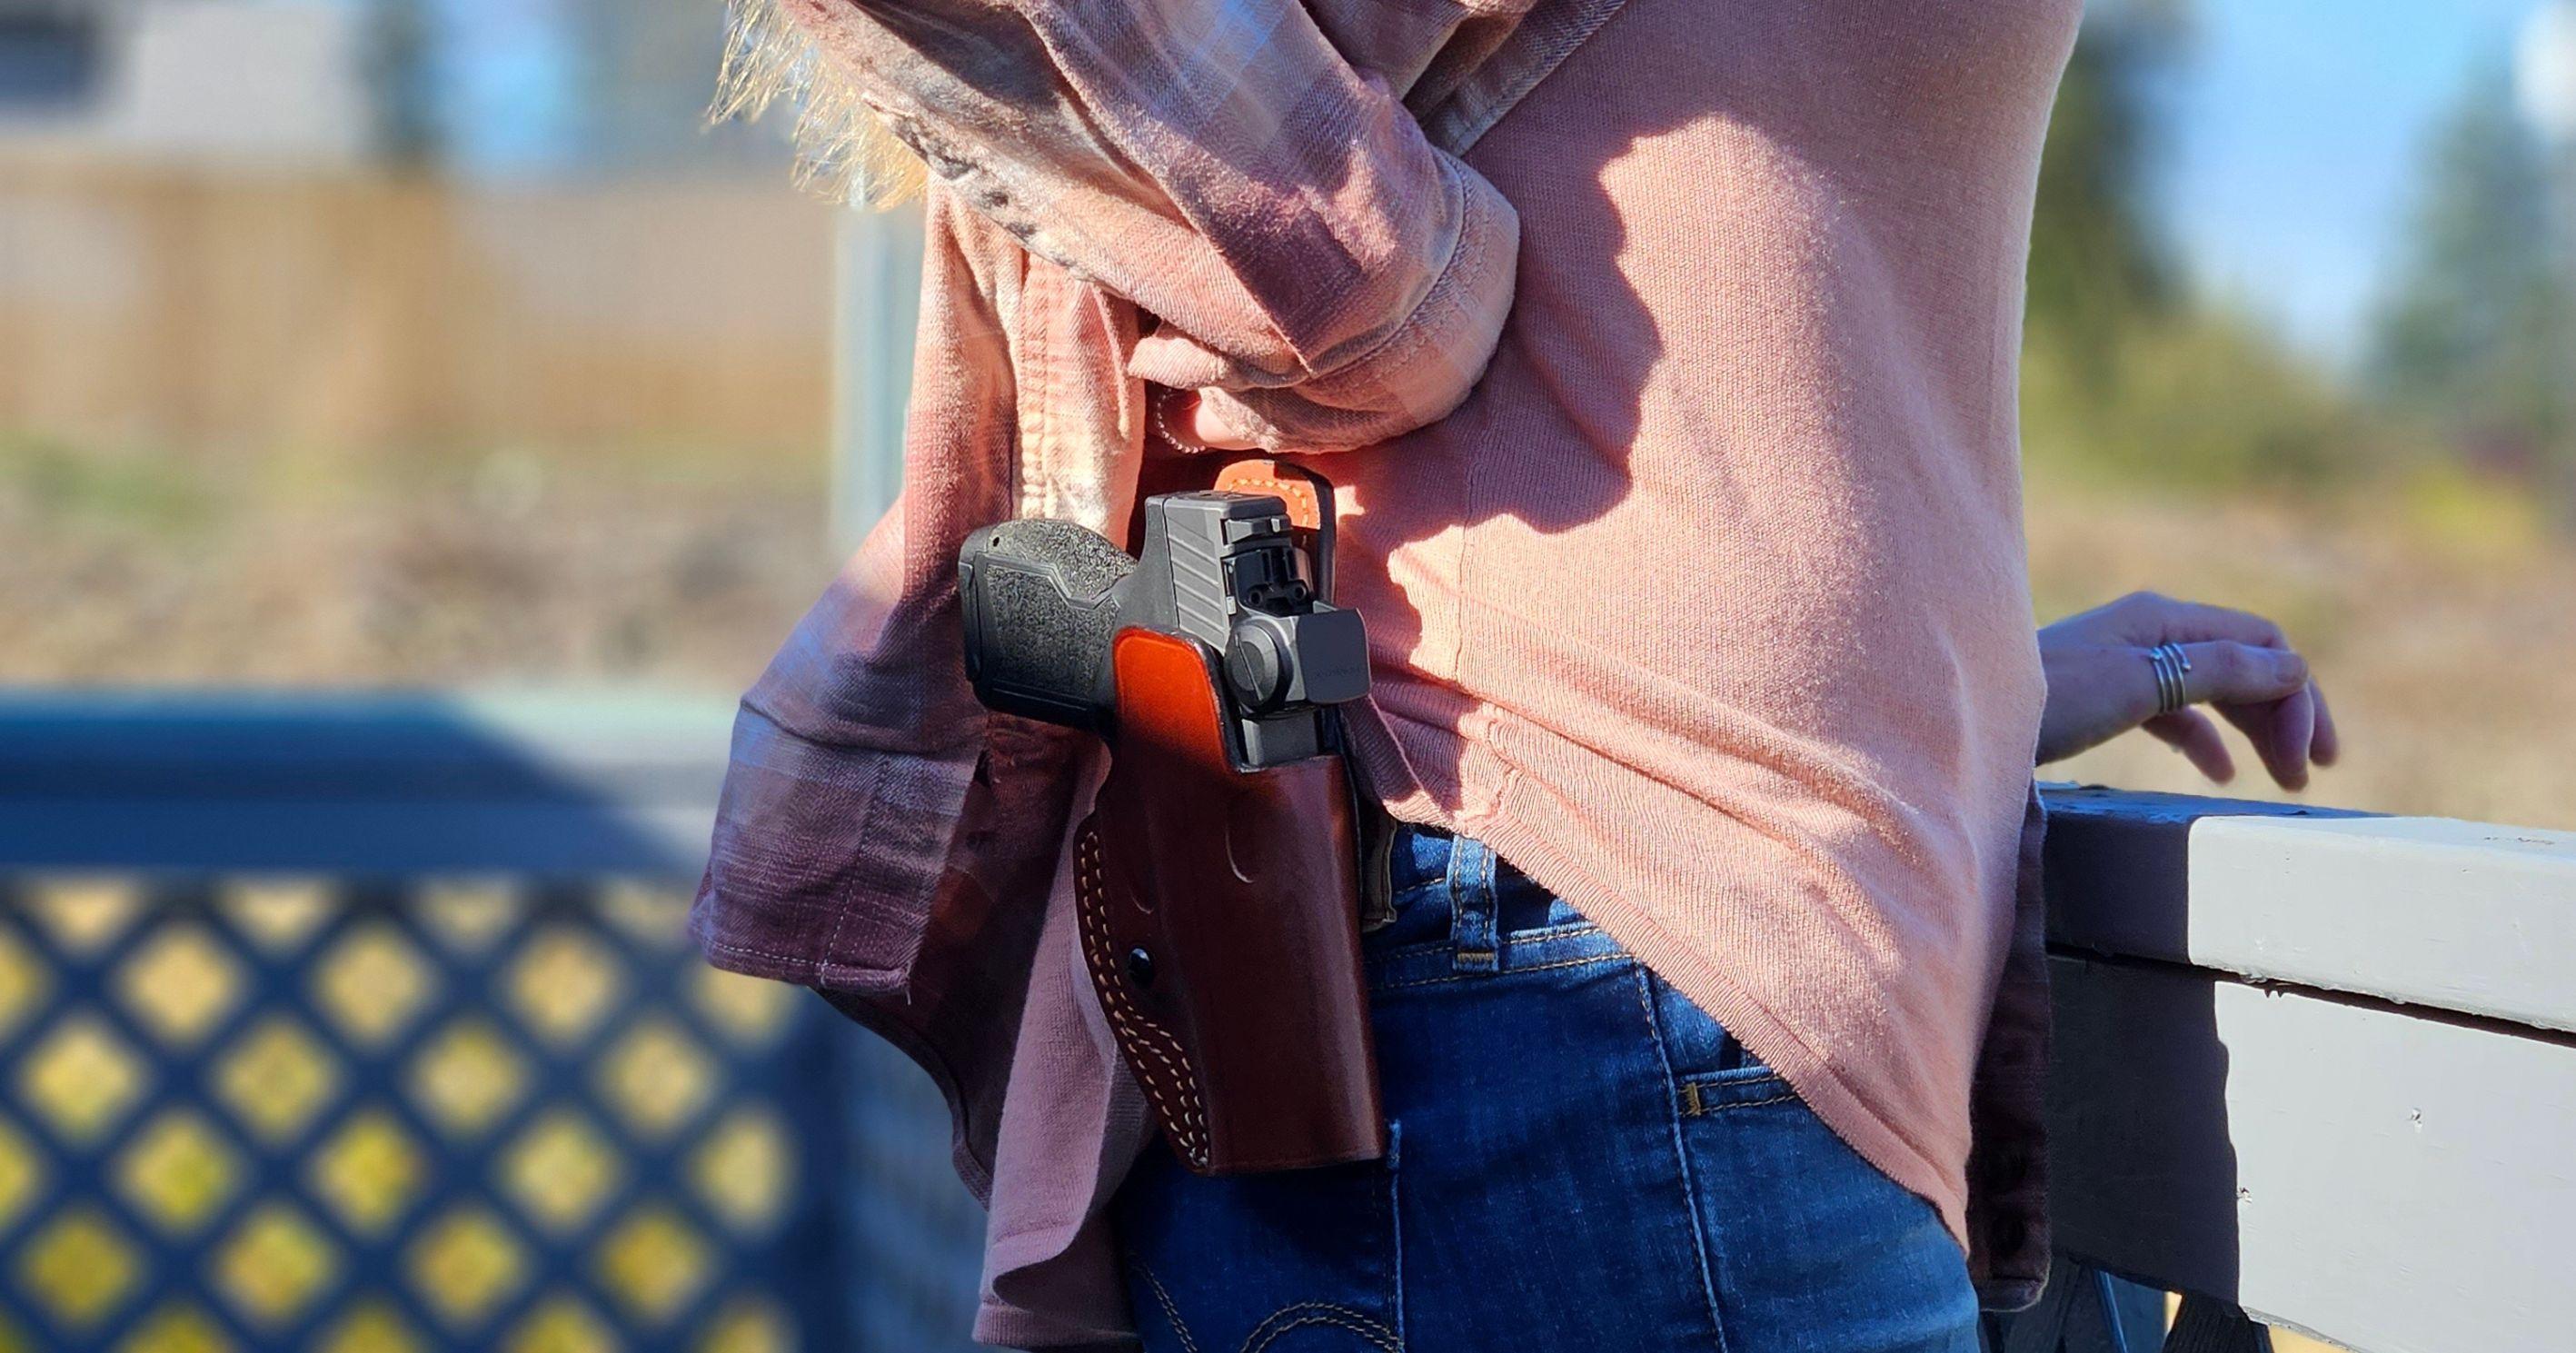 10 Beer Holsters For Your Next Party – Real Country Ladies